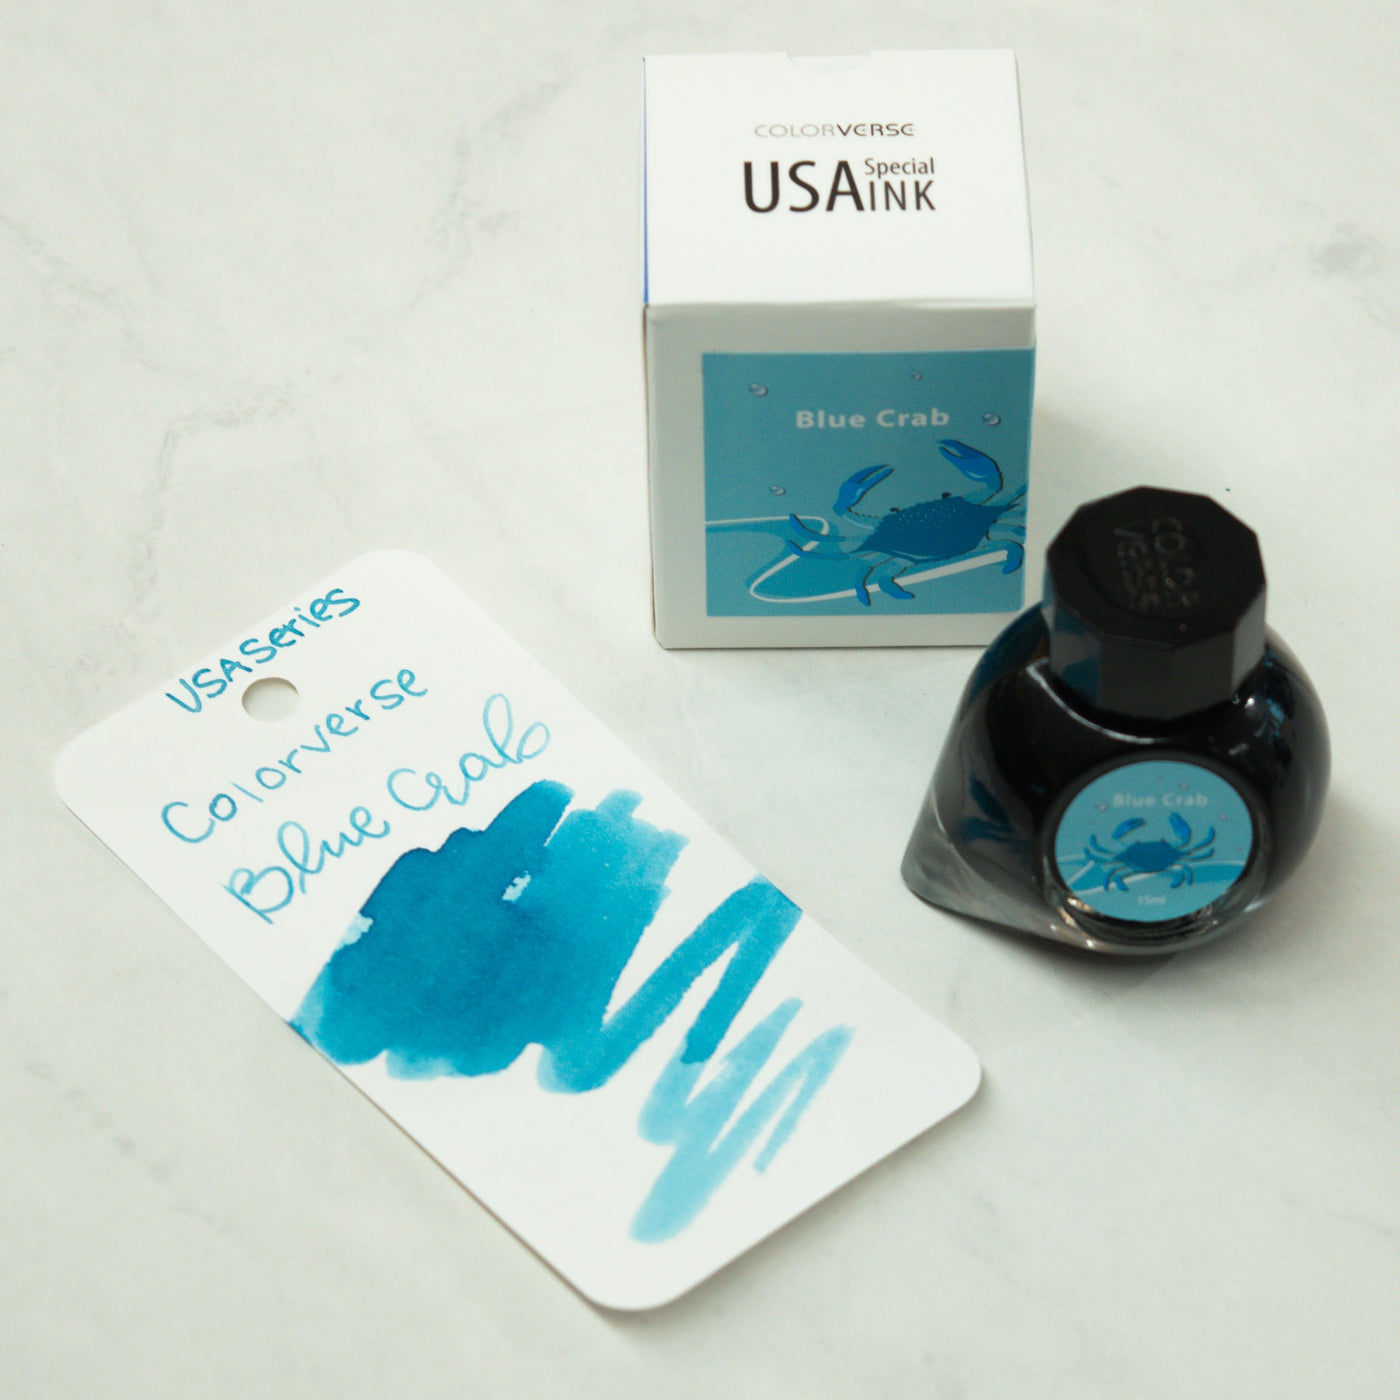 Colorverse USA Special Series Maryland Blue Crab Ink